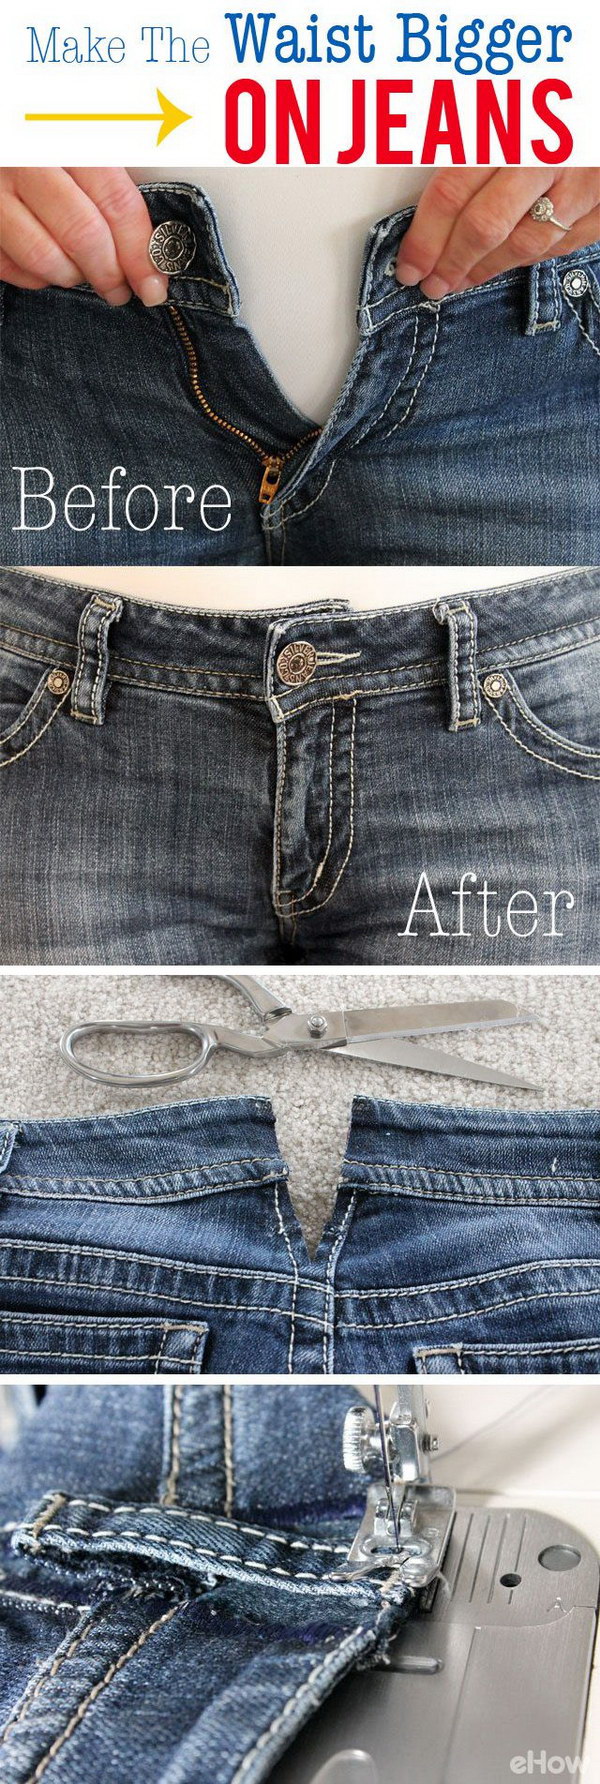 How to Make the Waist Bigger on Jeans. 